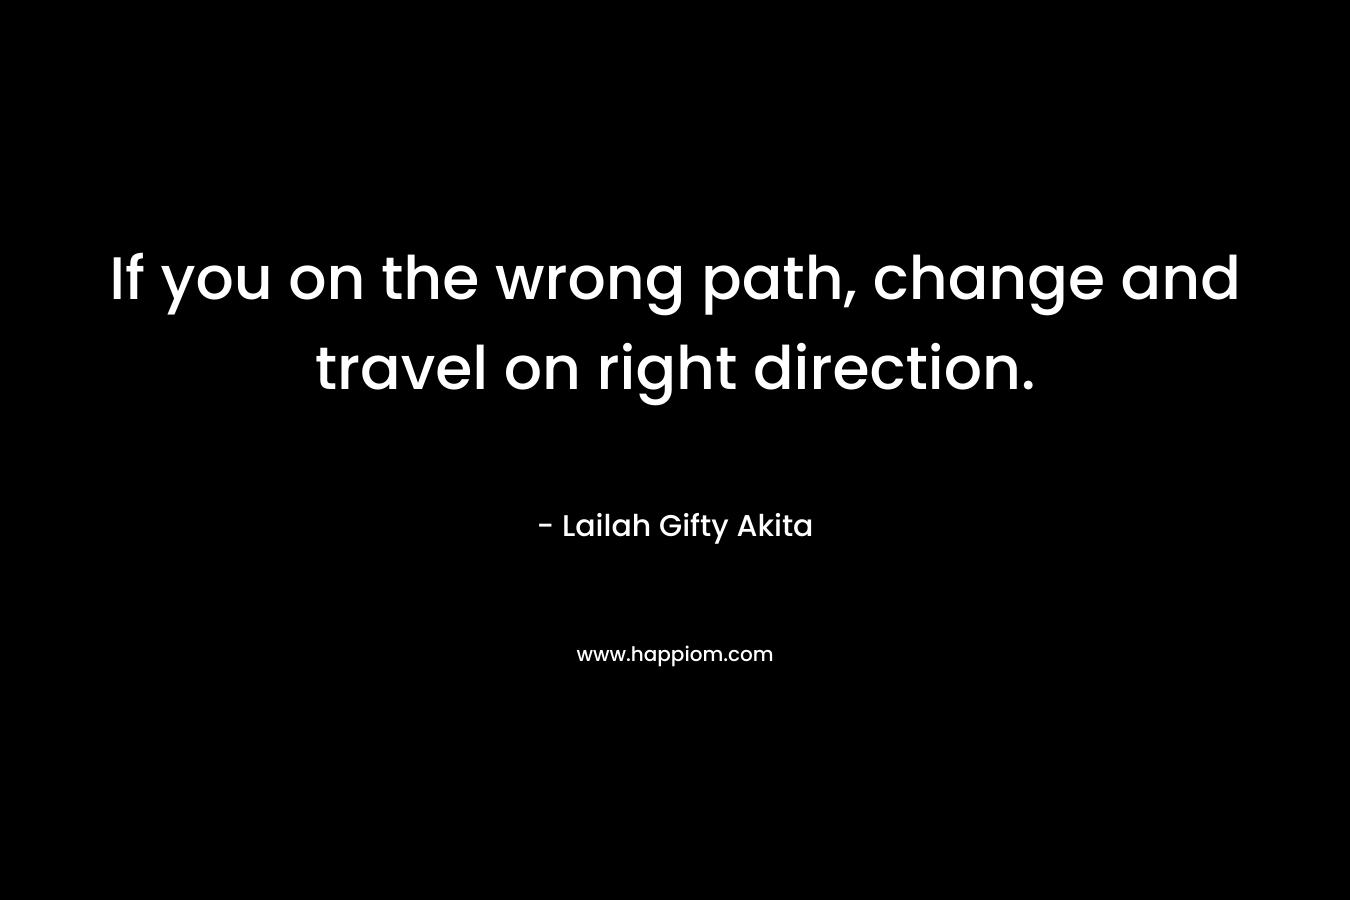 If you on the wrong path, change and travel on right direction.